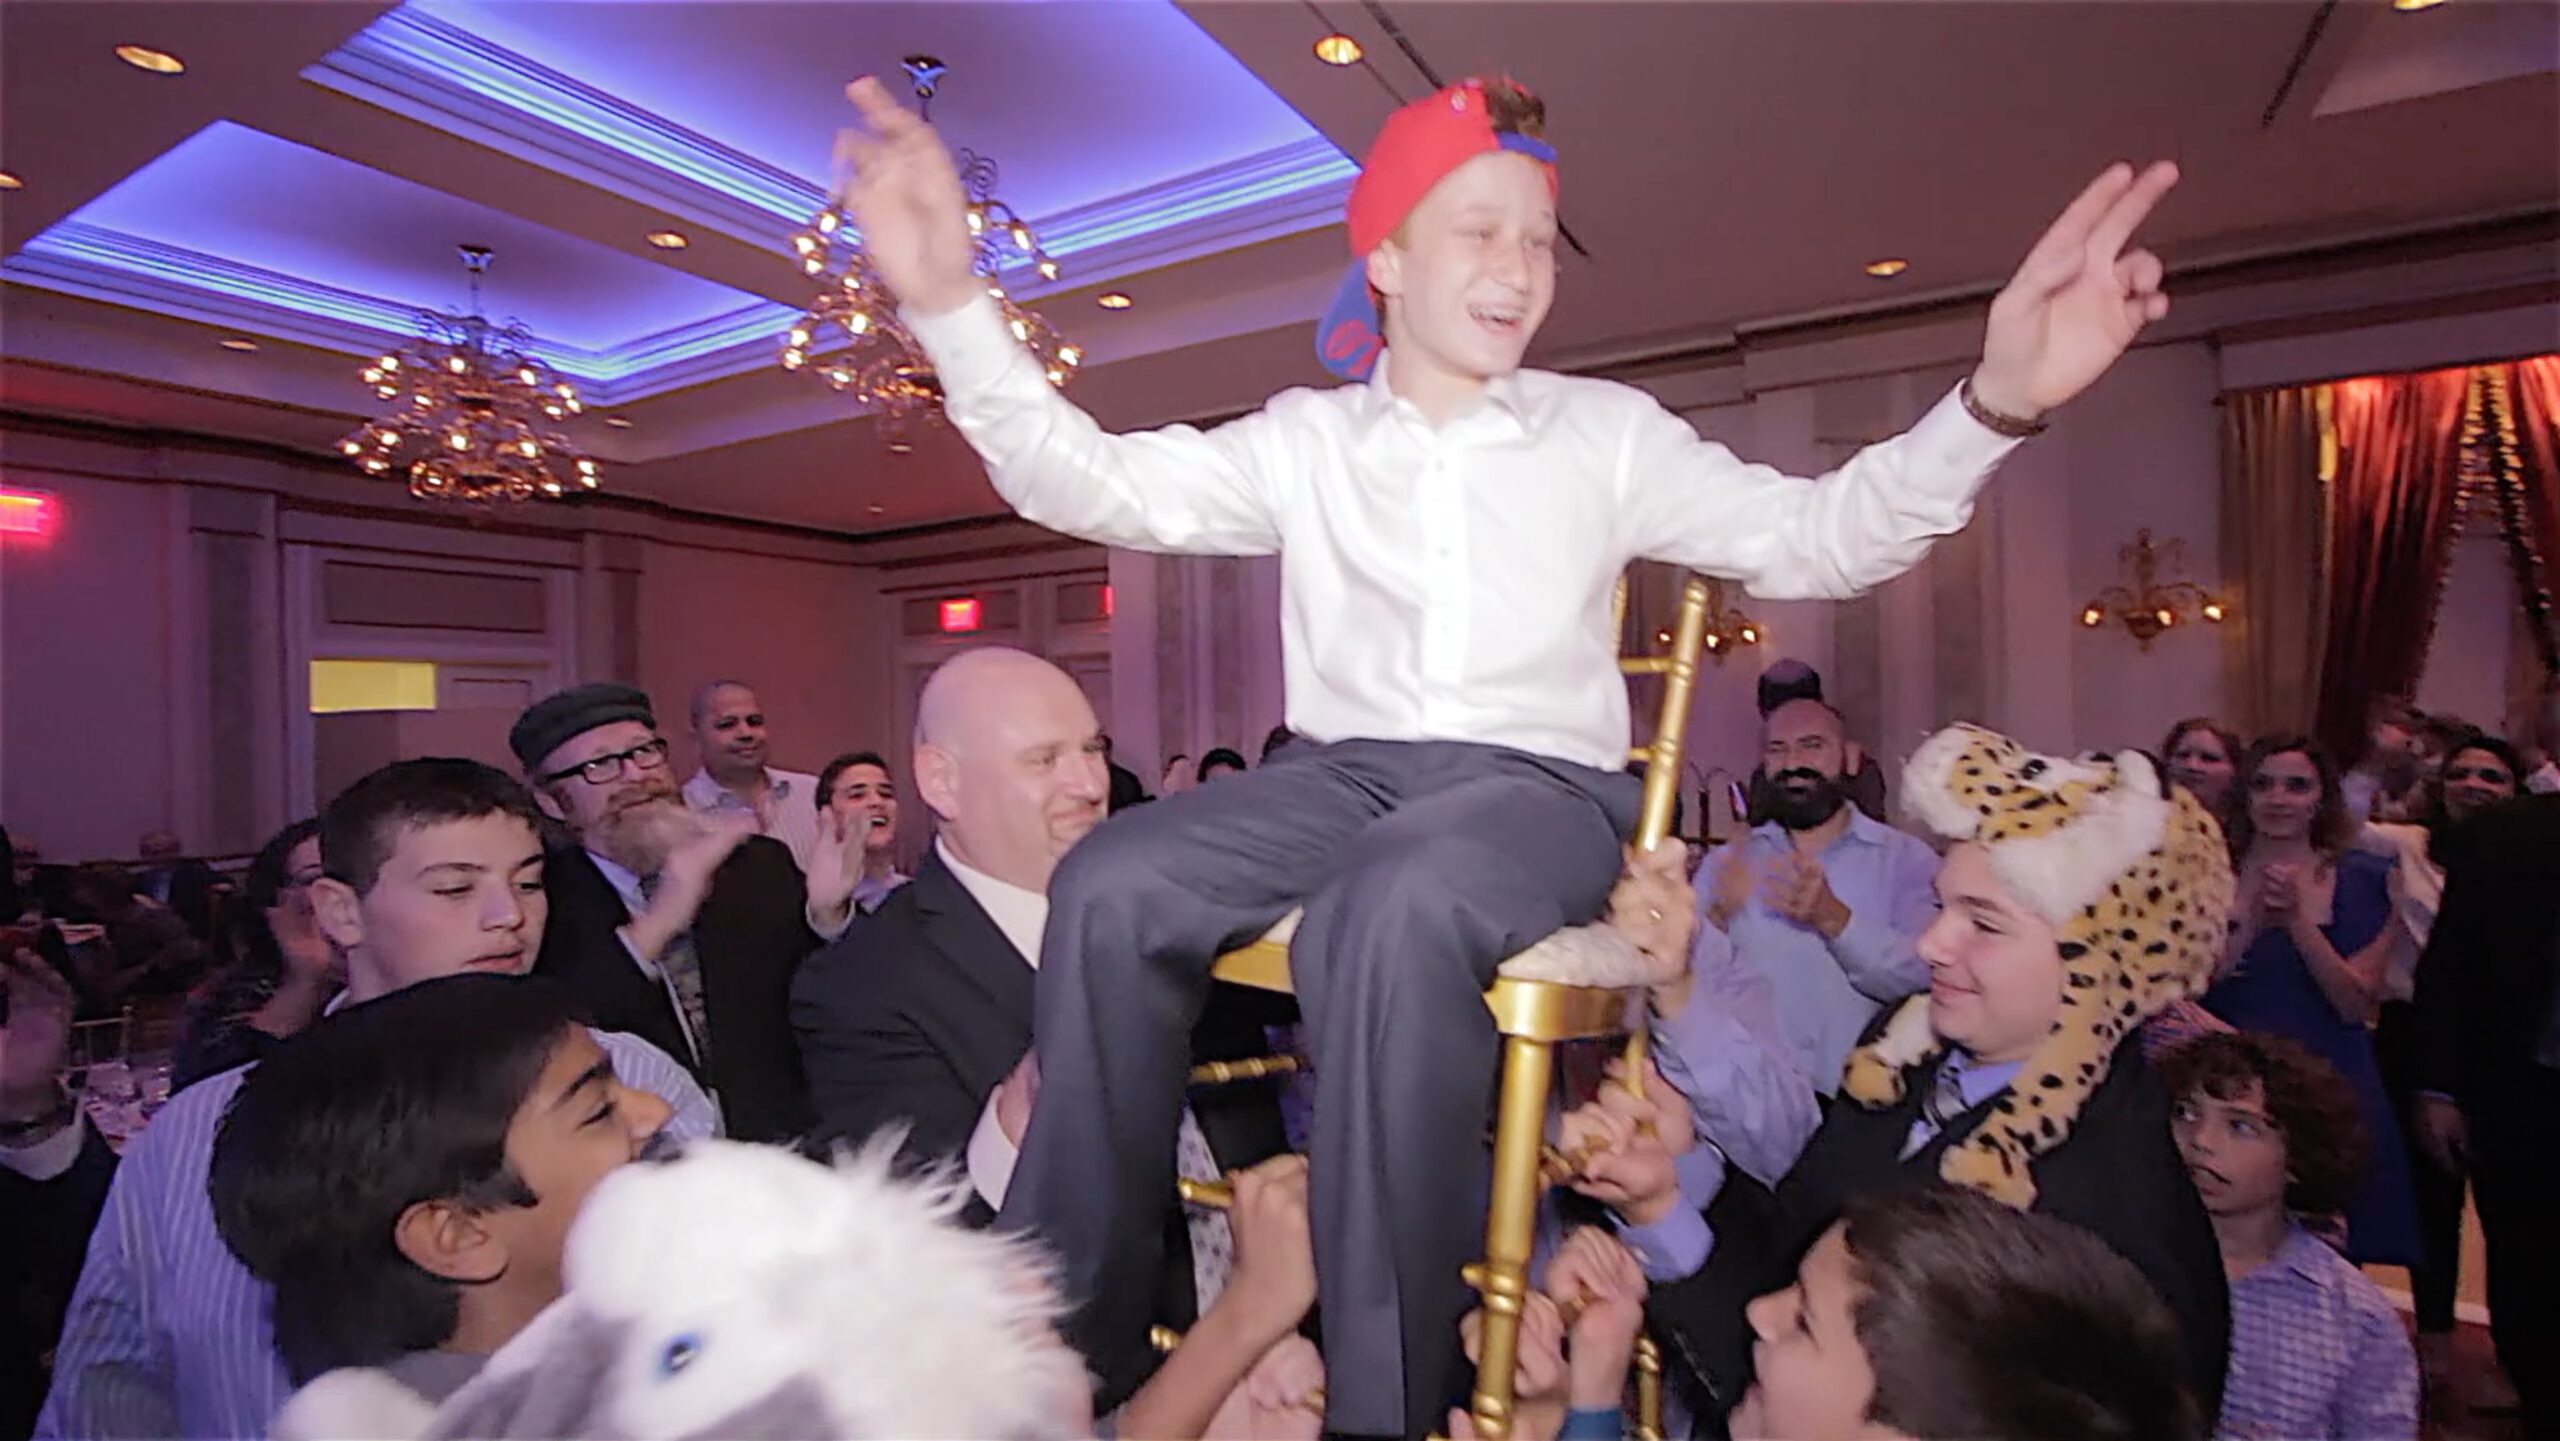 Jacob's Bar Mitzvah Party Cinematic Trailer Video at Grove NJ